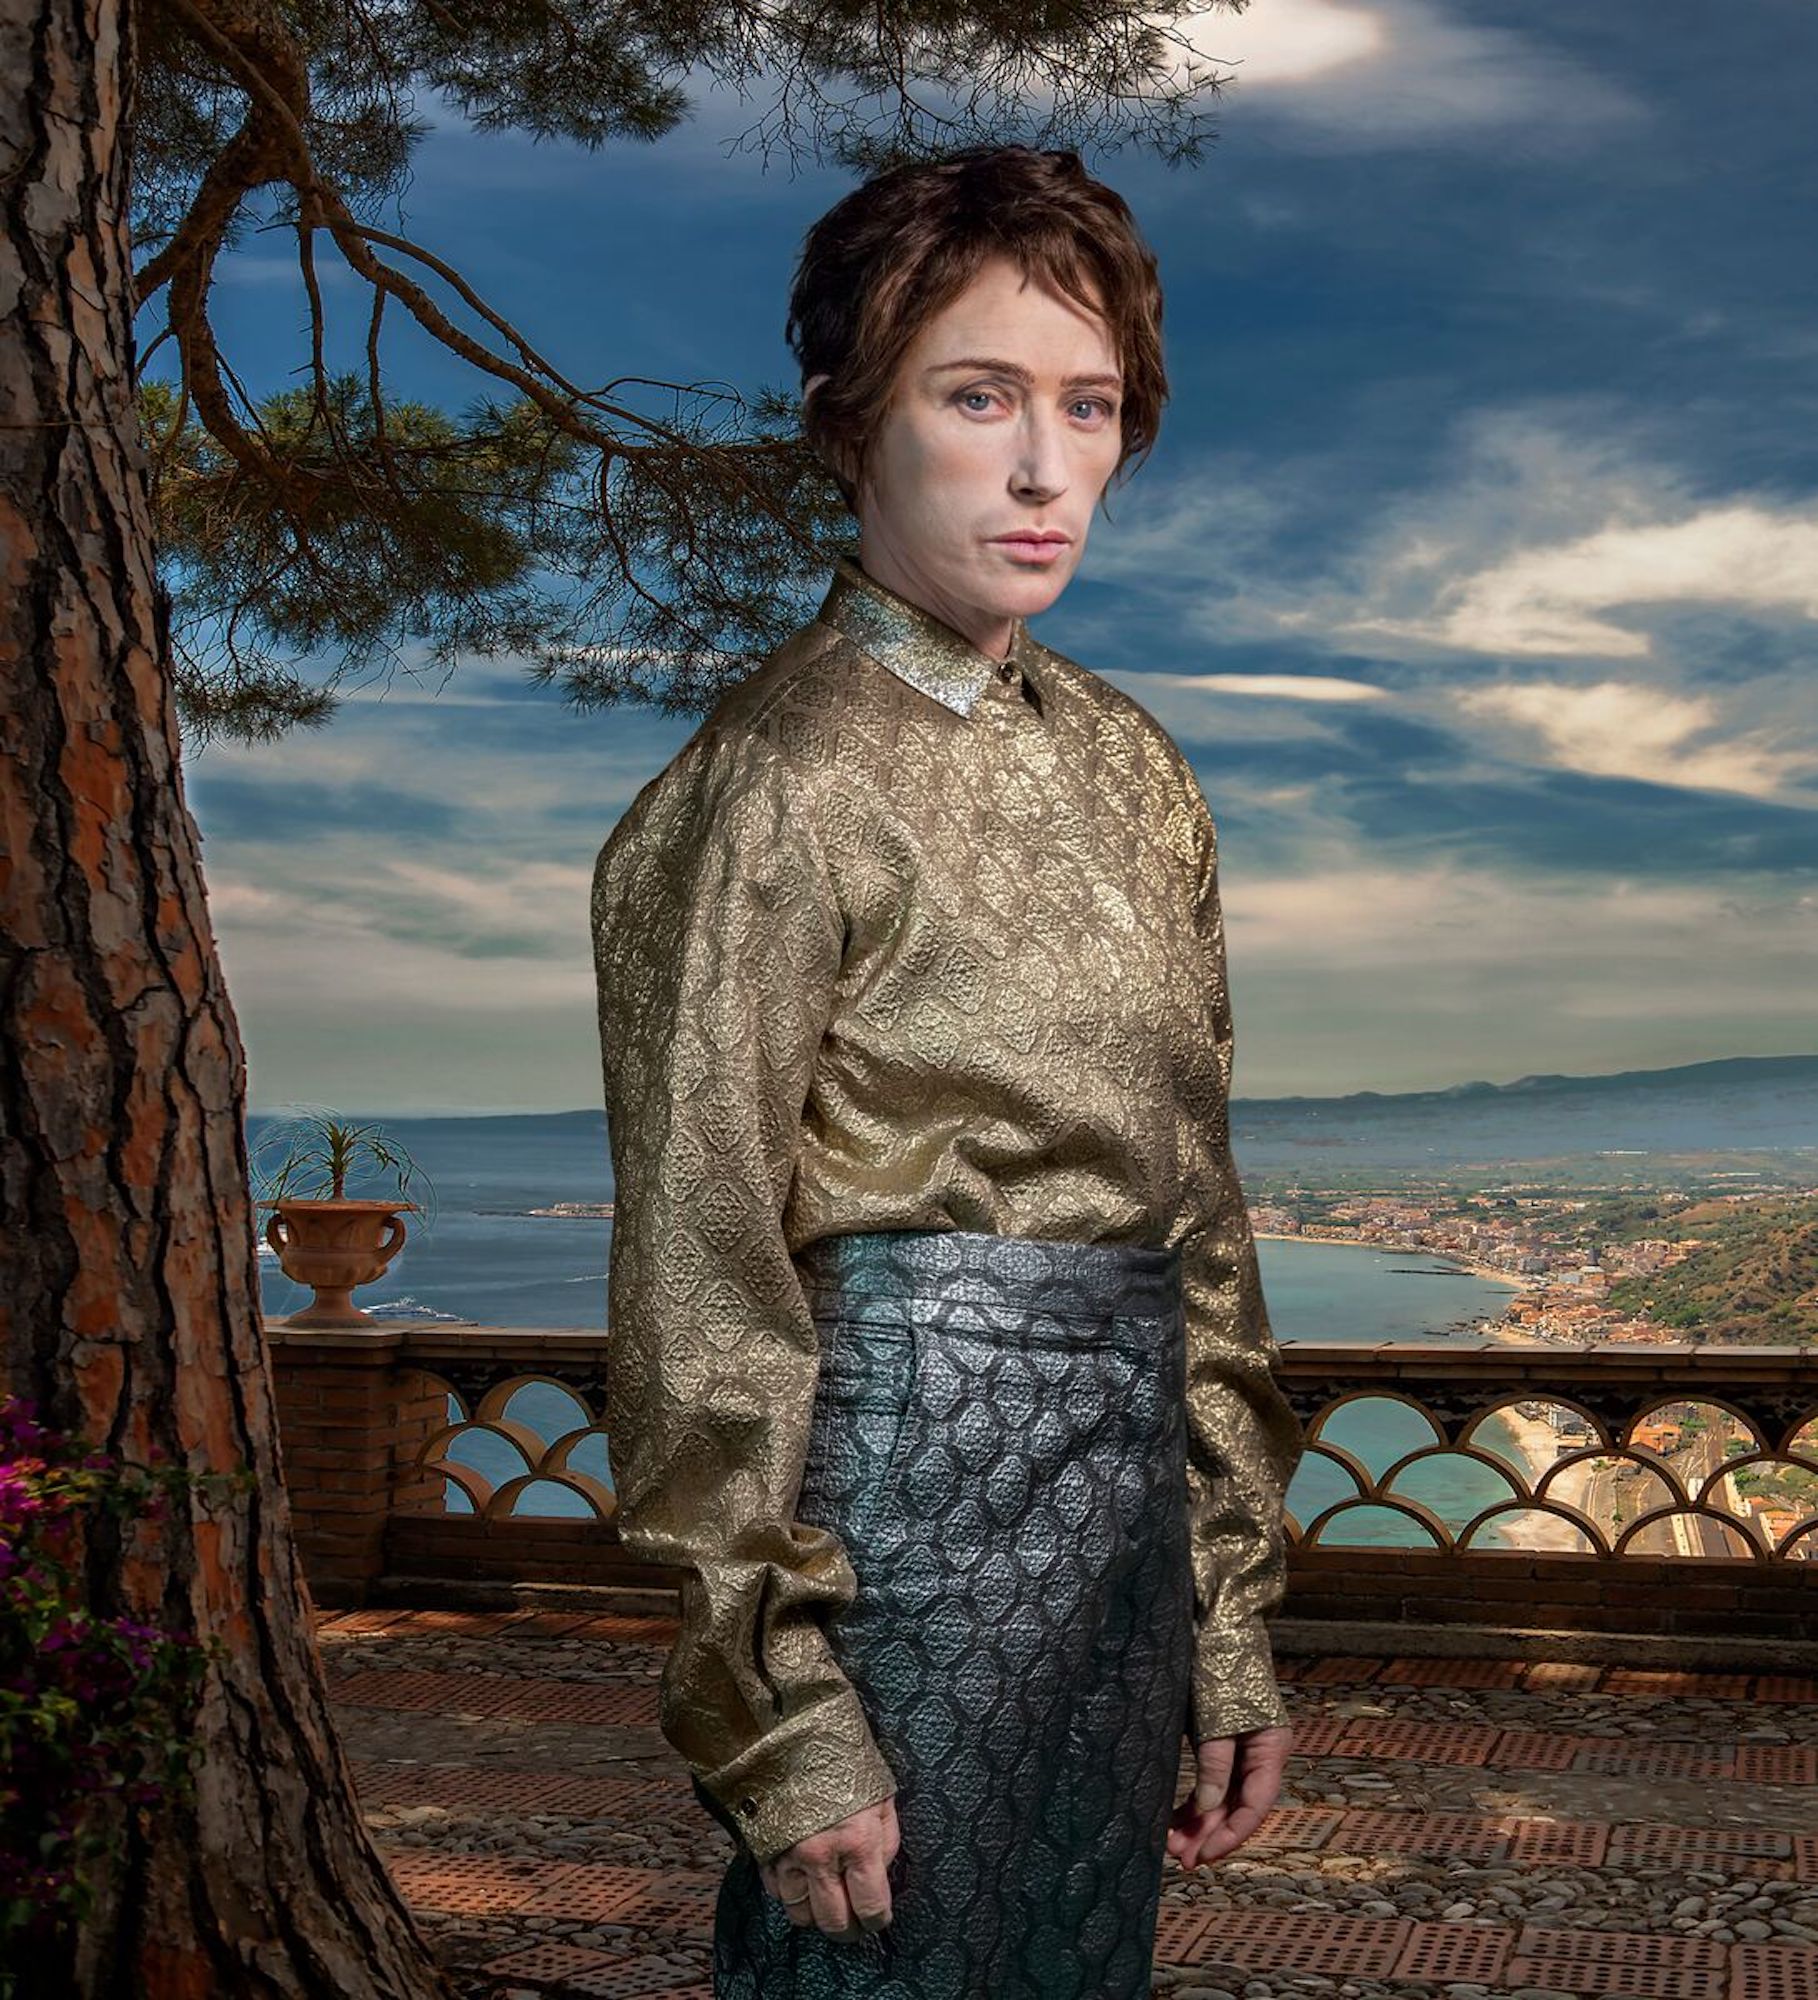 Cindy Sherman Biography, Artworks & Exhibitions